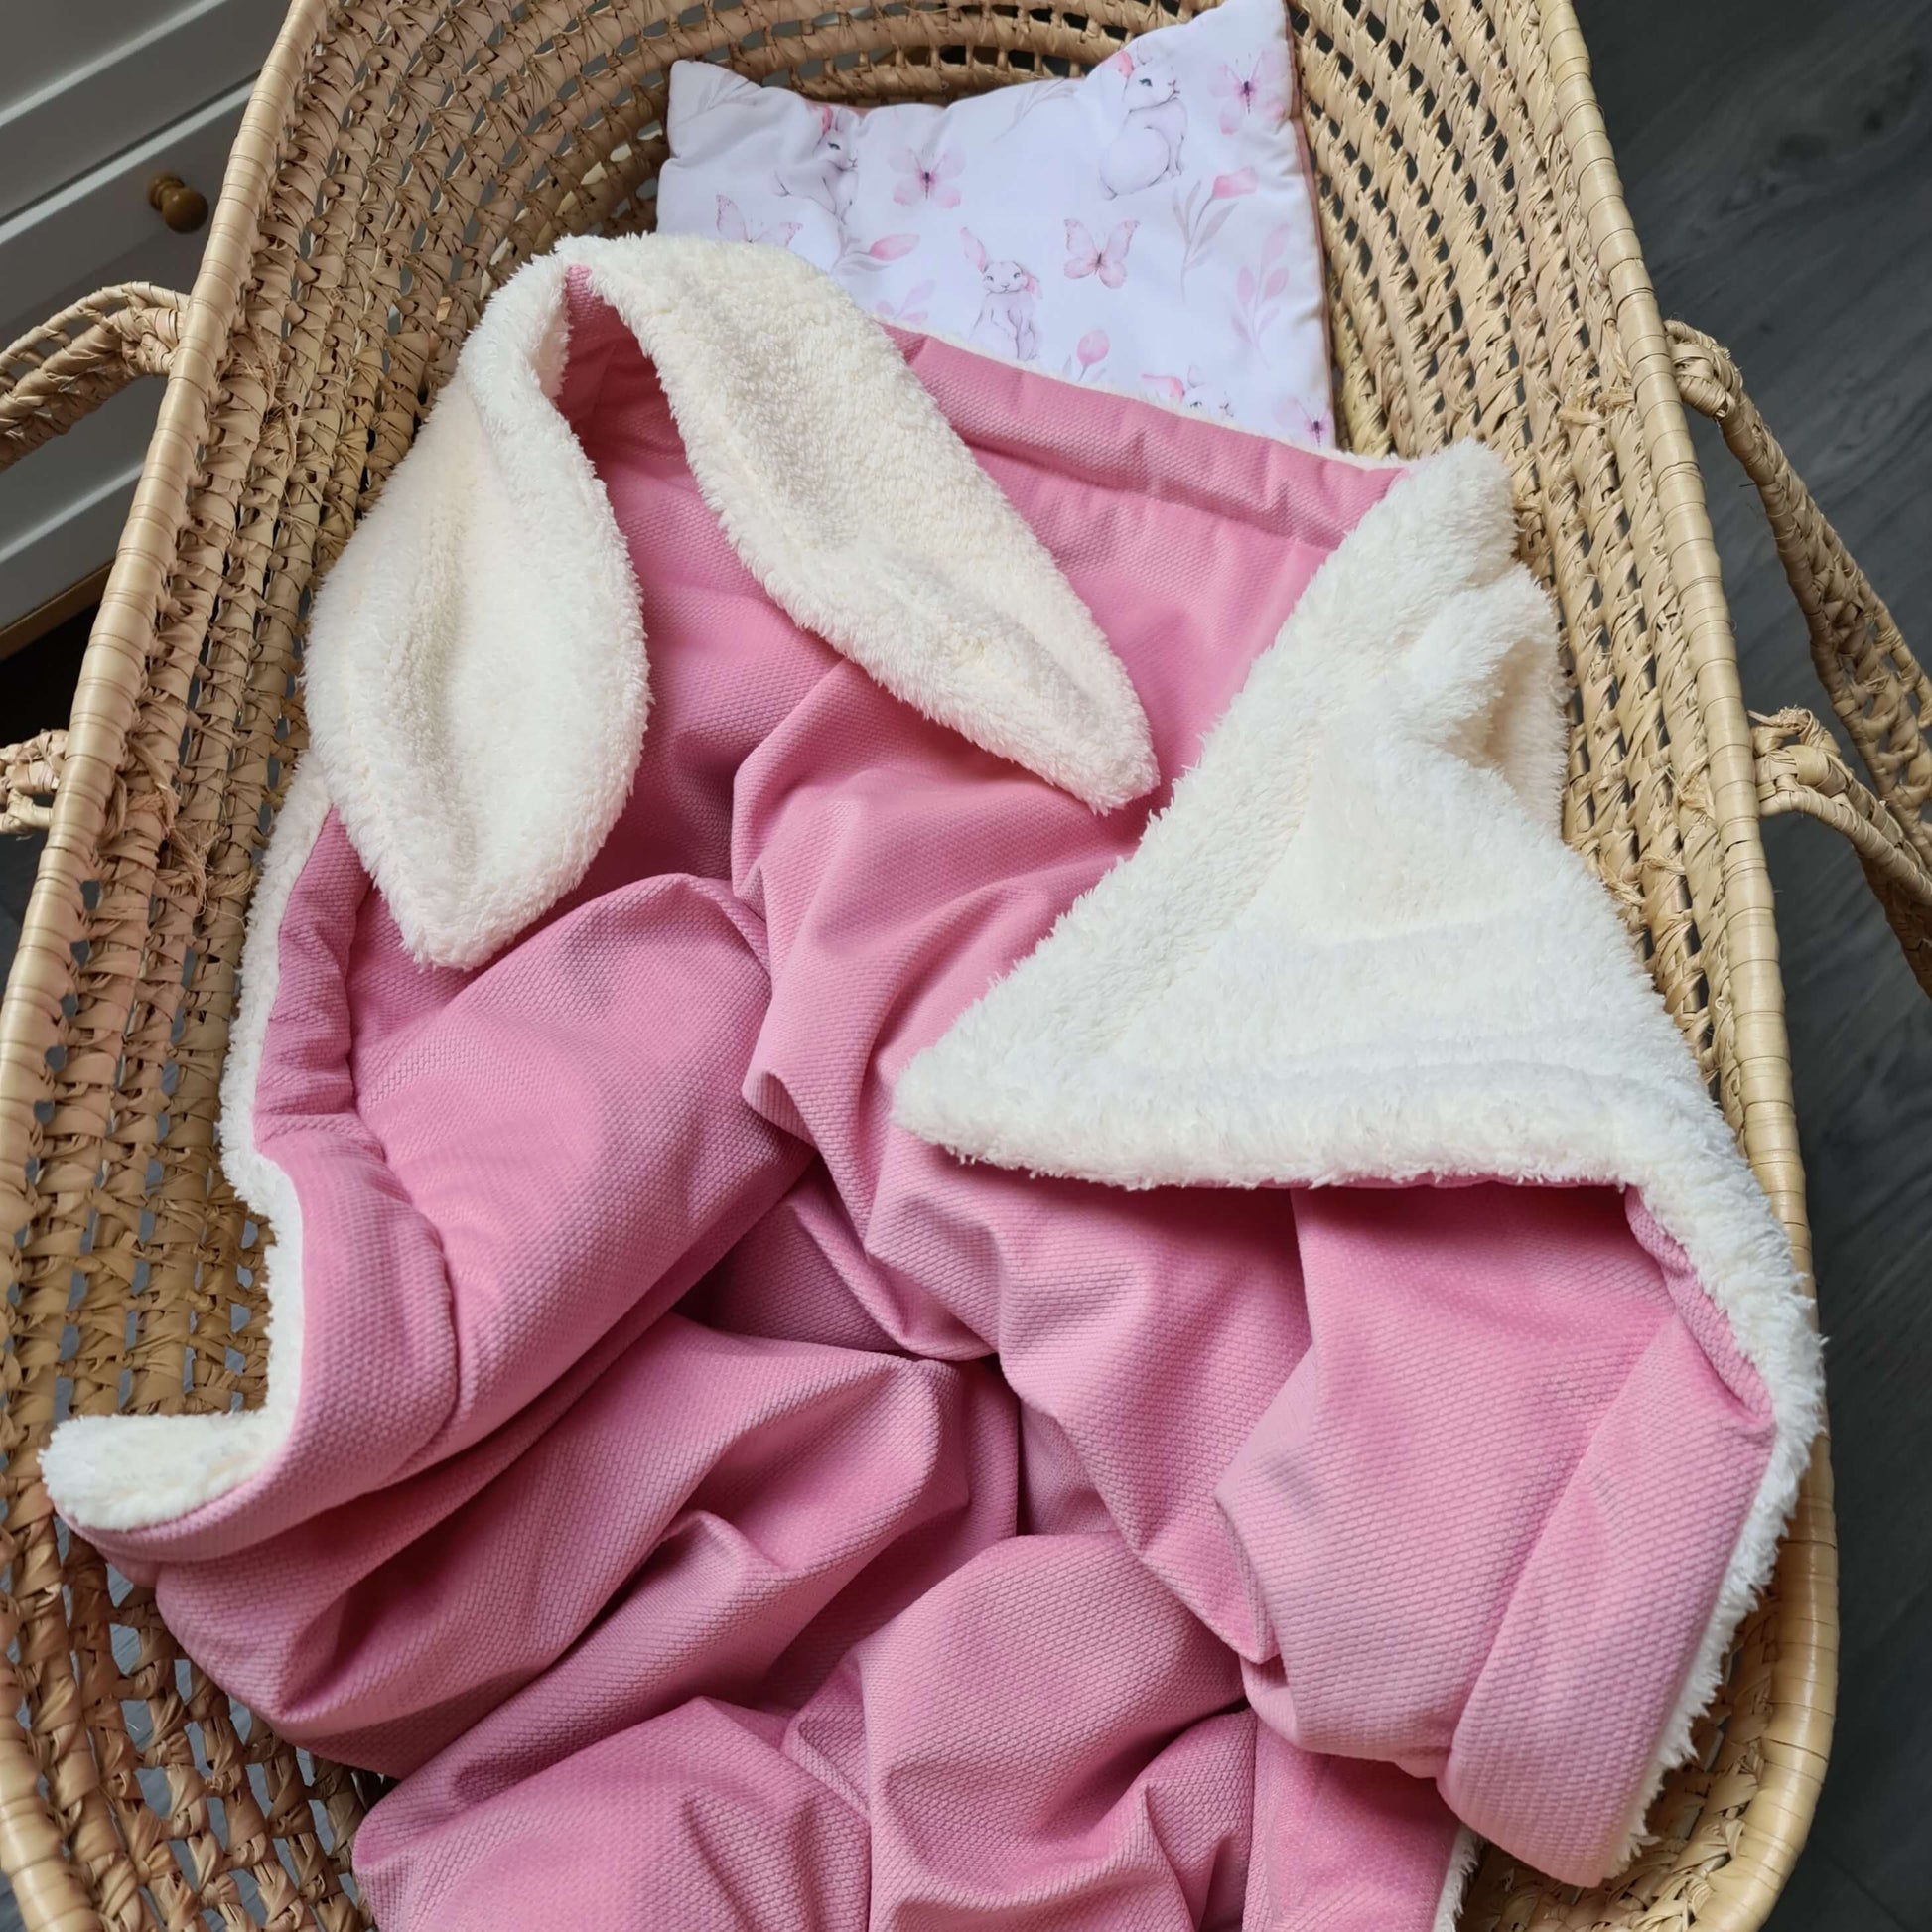 pink blanket for baby girl with bunny ears - cosy pacifier